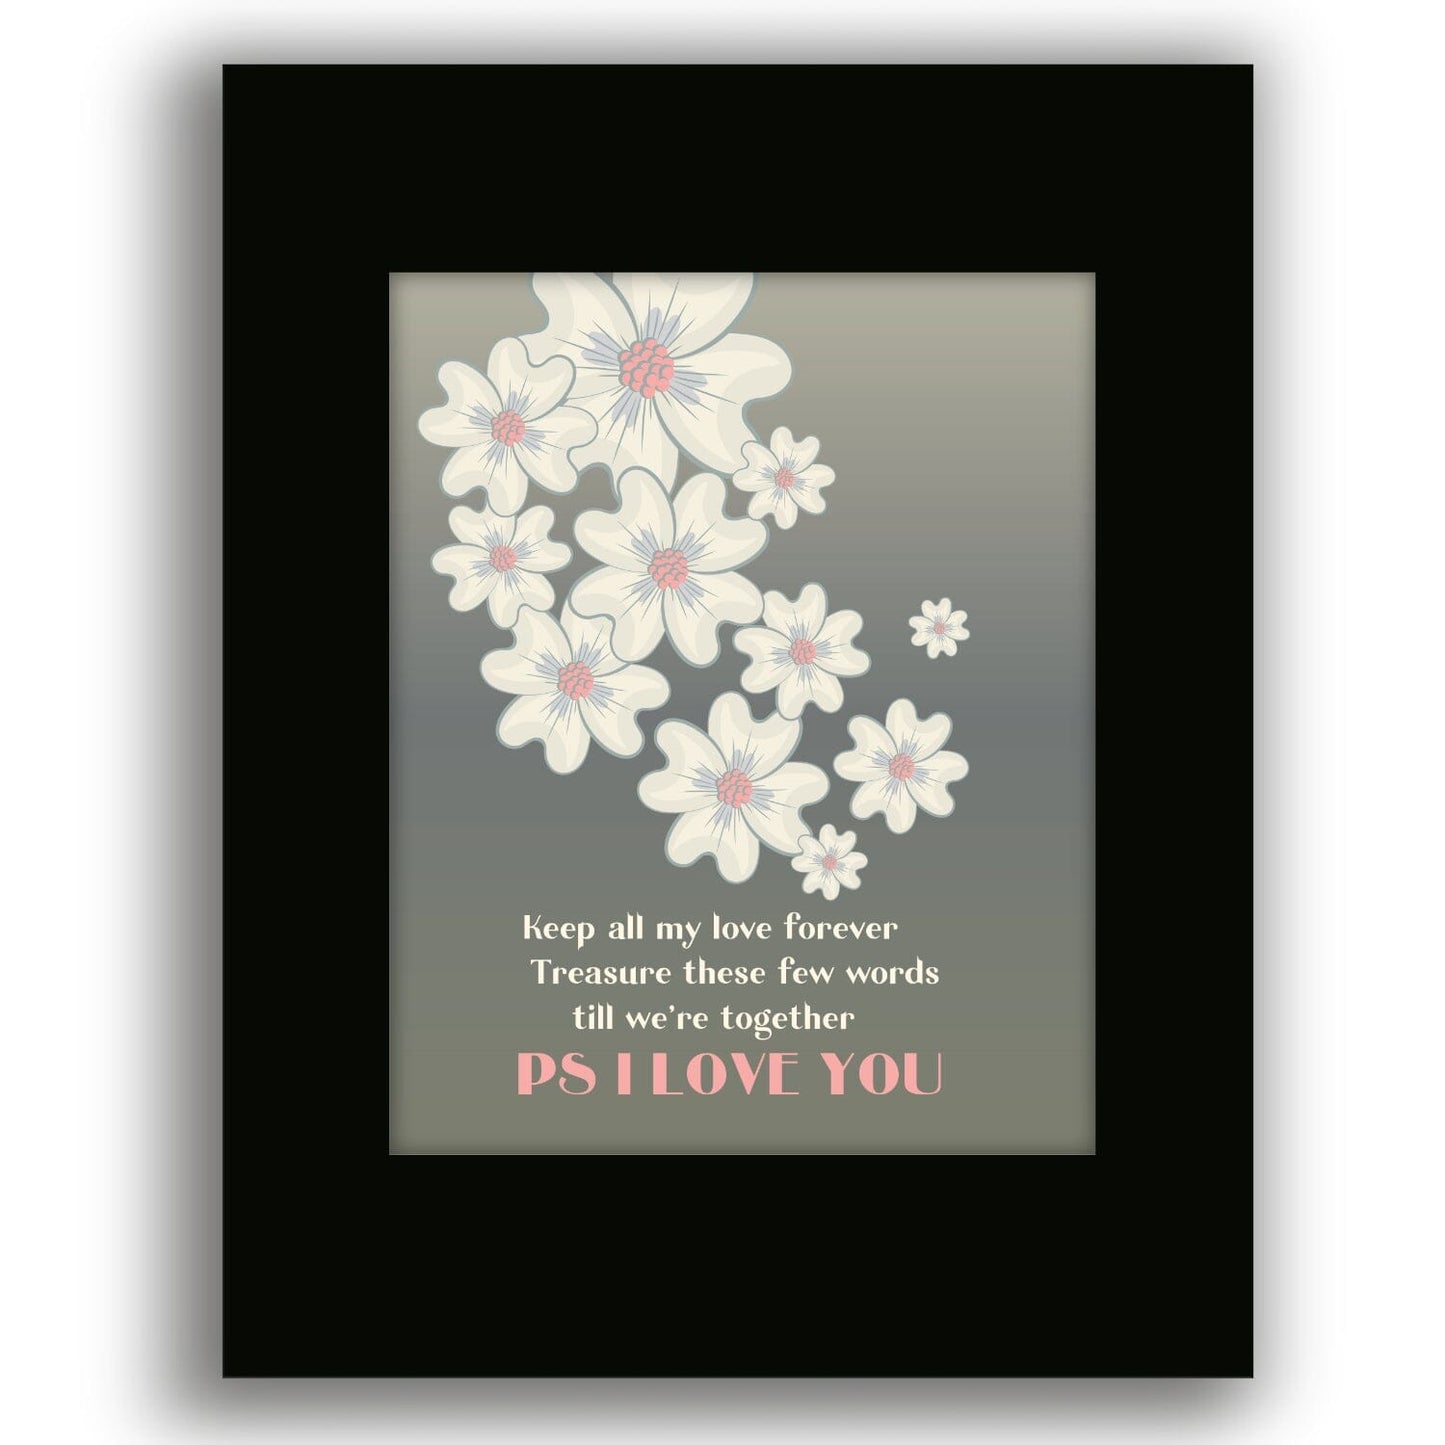 PS I Love You by Beatles - Music Memorabilia Love Song Art Song Lyrics Art Song Lyrics Art 8x10 Black Matted Print 